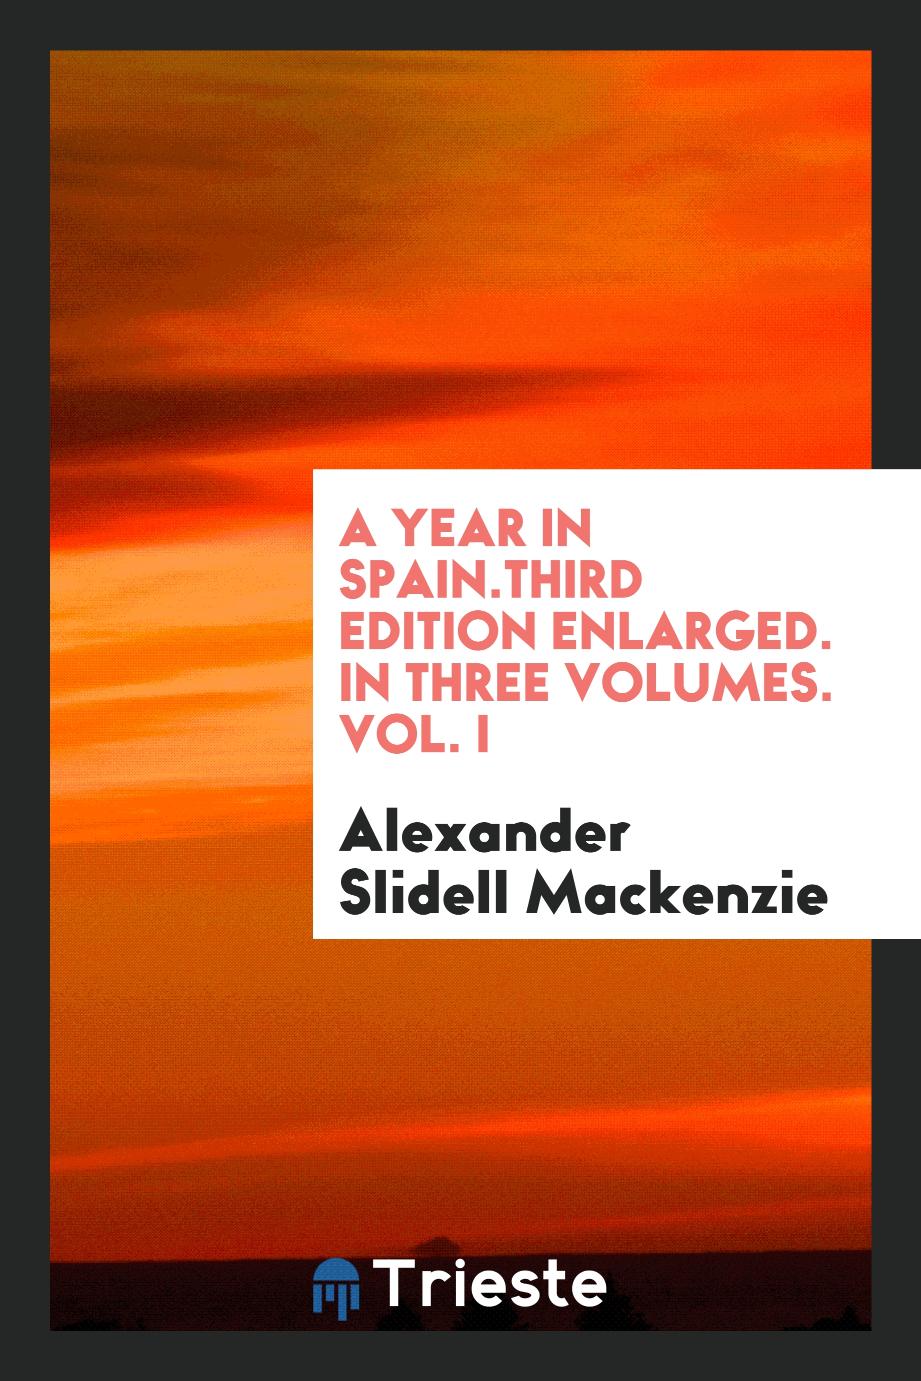 A year in Spain.Third edition enlarged. In three volumes. Vol. I